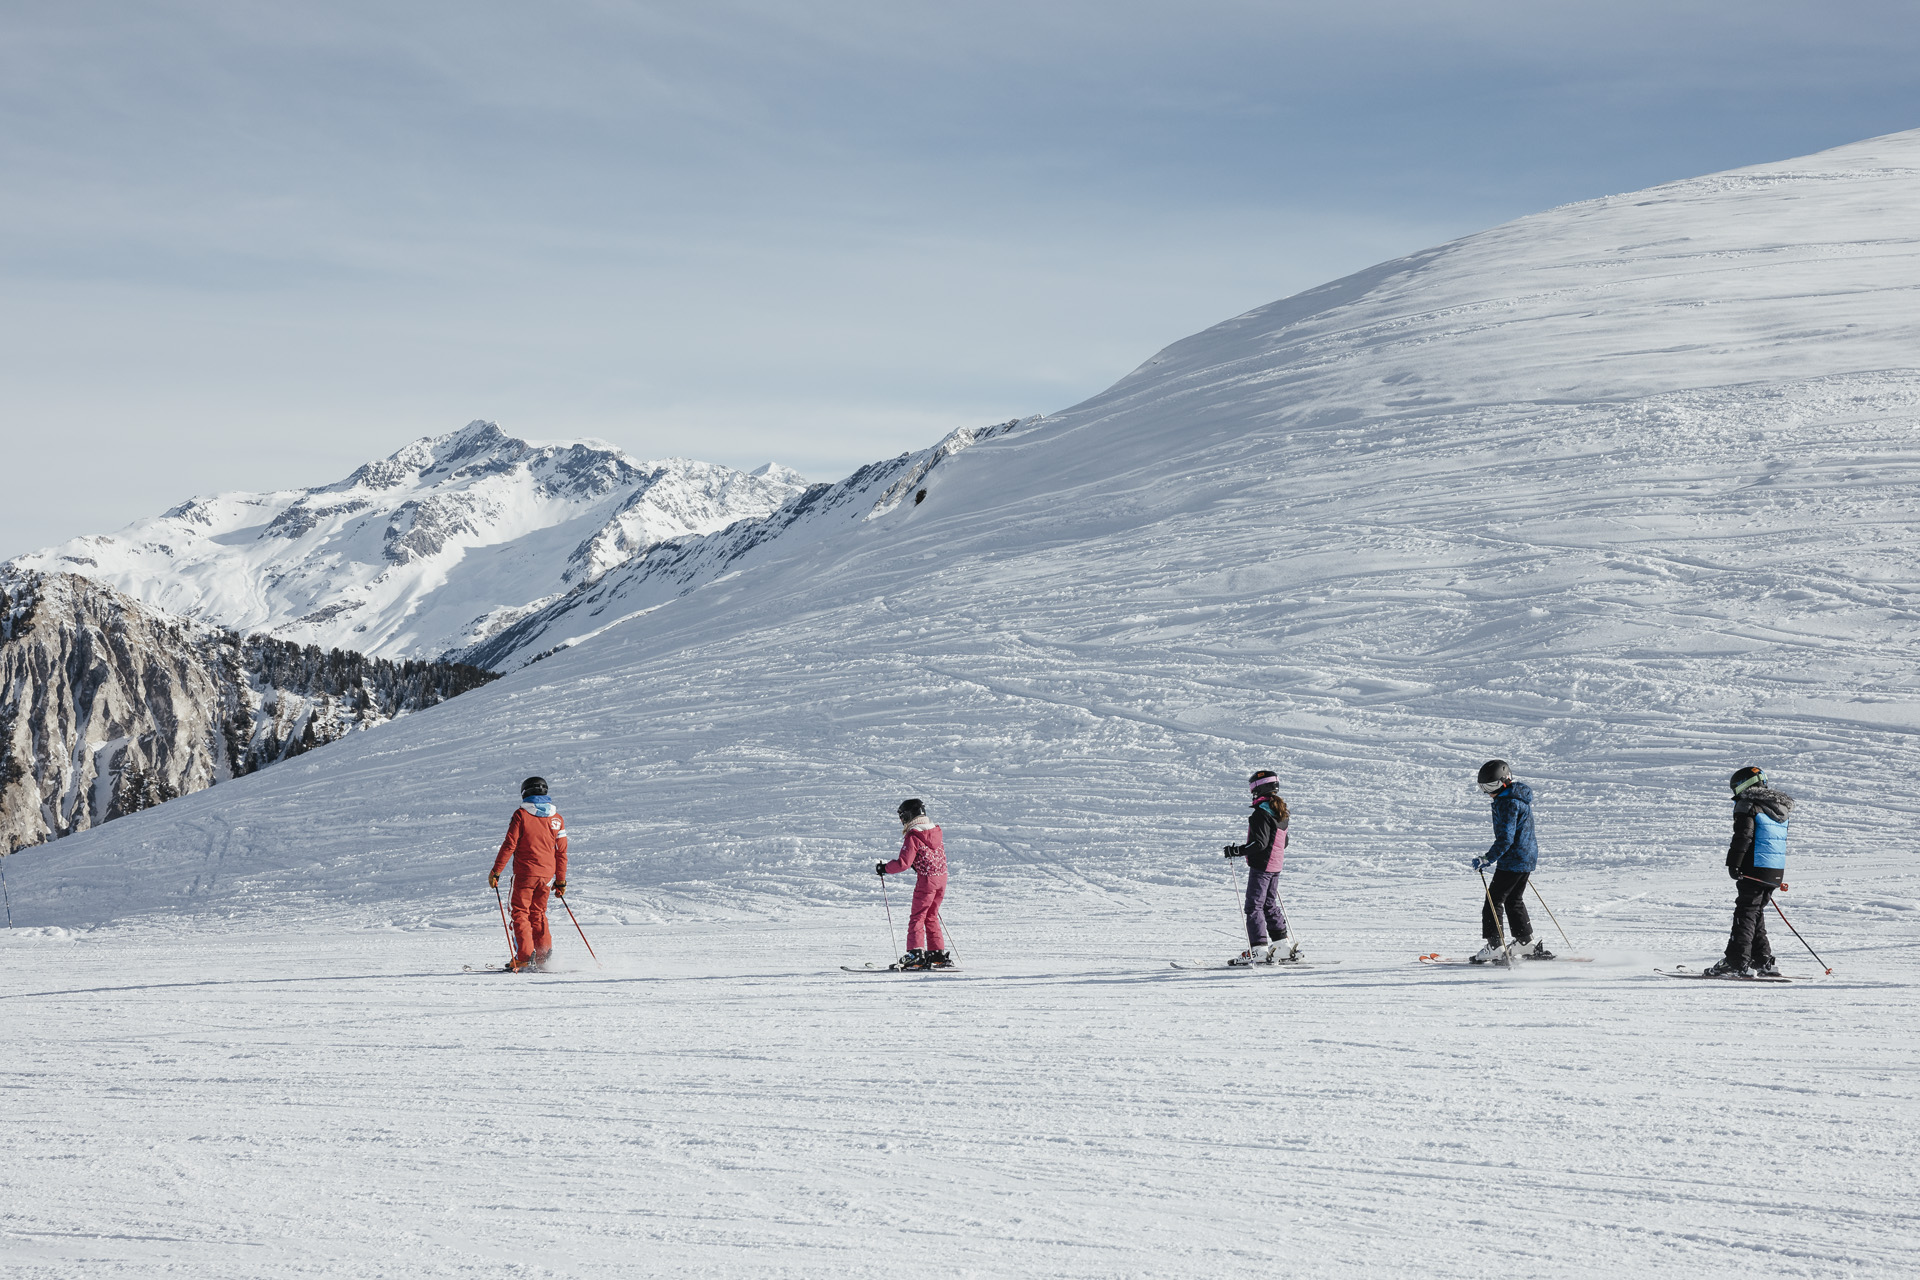 Young skiiers on the snowy mountain